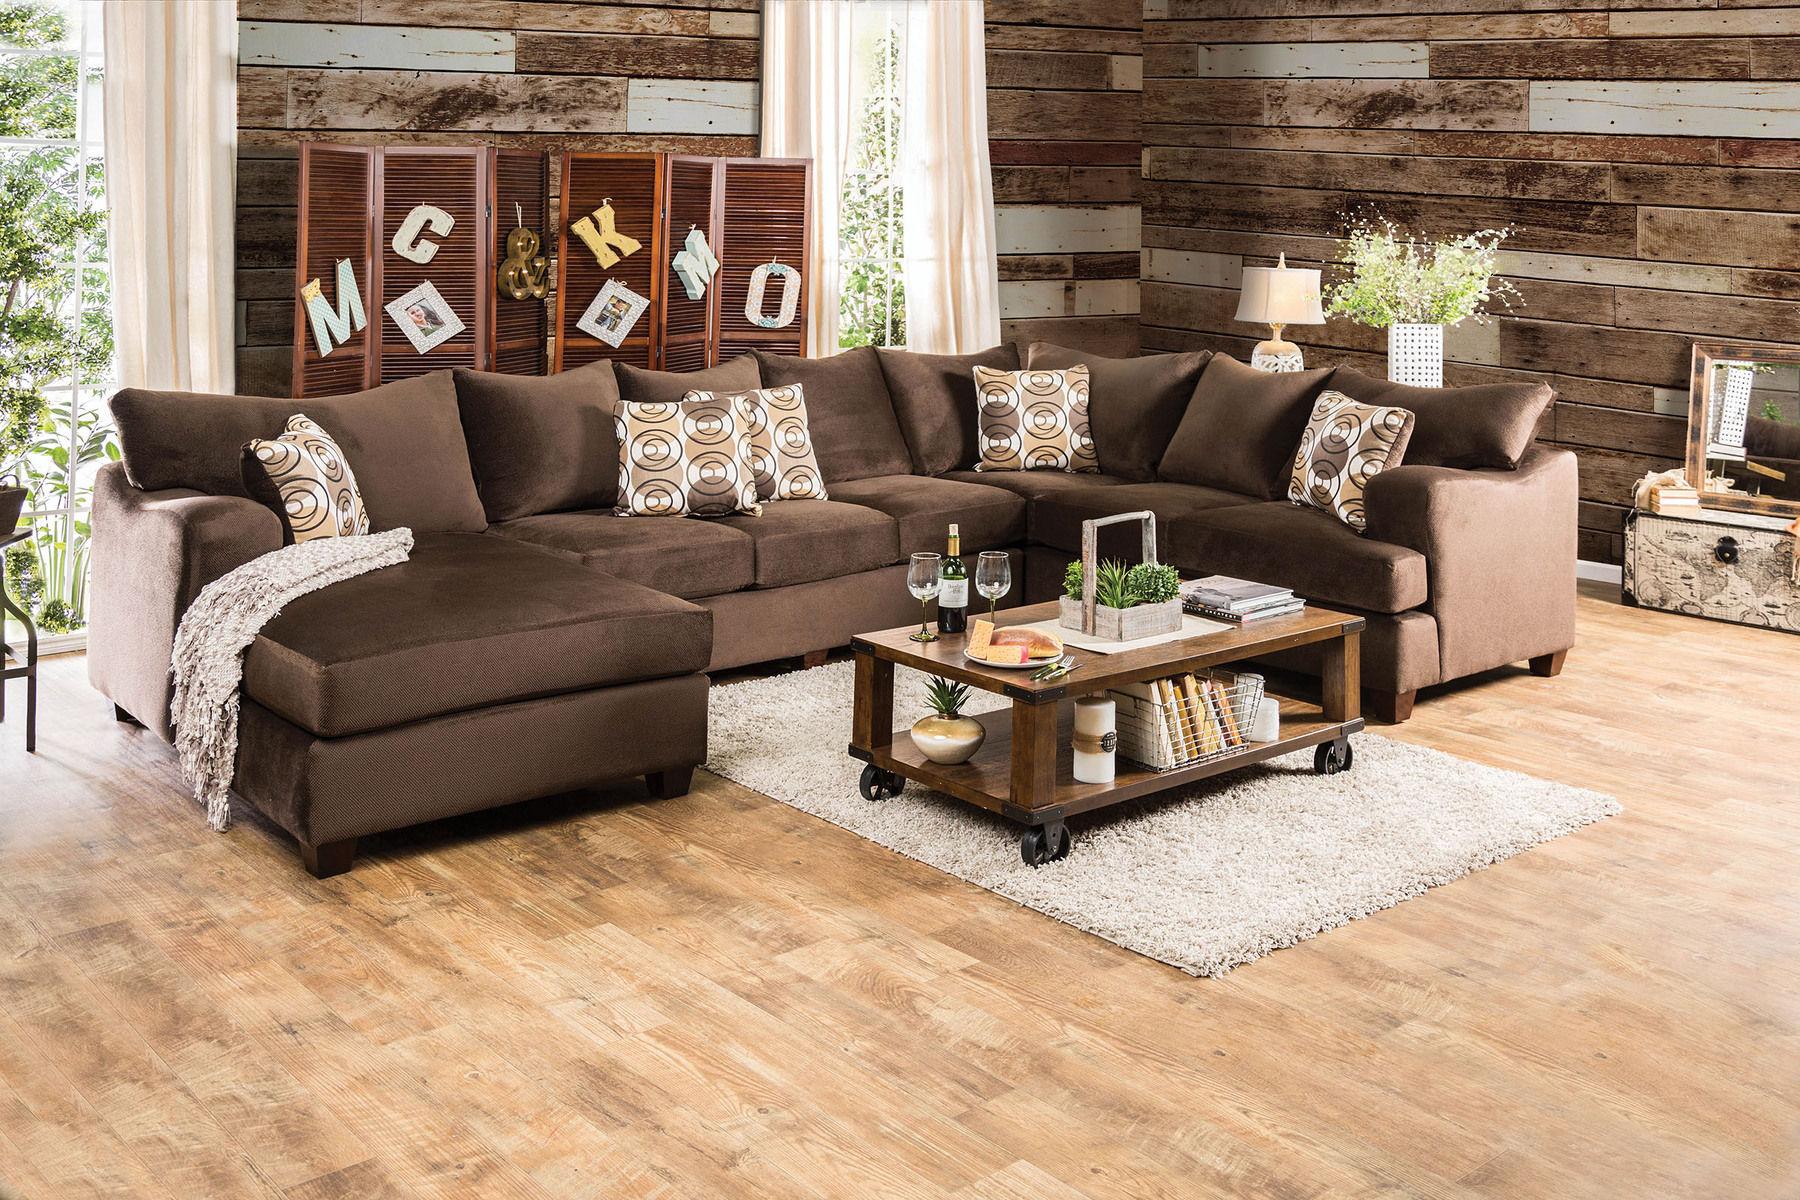 Transitional Sectional Sofa WESSINGTON SM6111 SM6111 in Chocolate Chenille